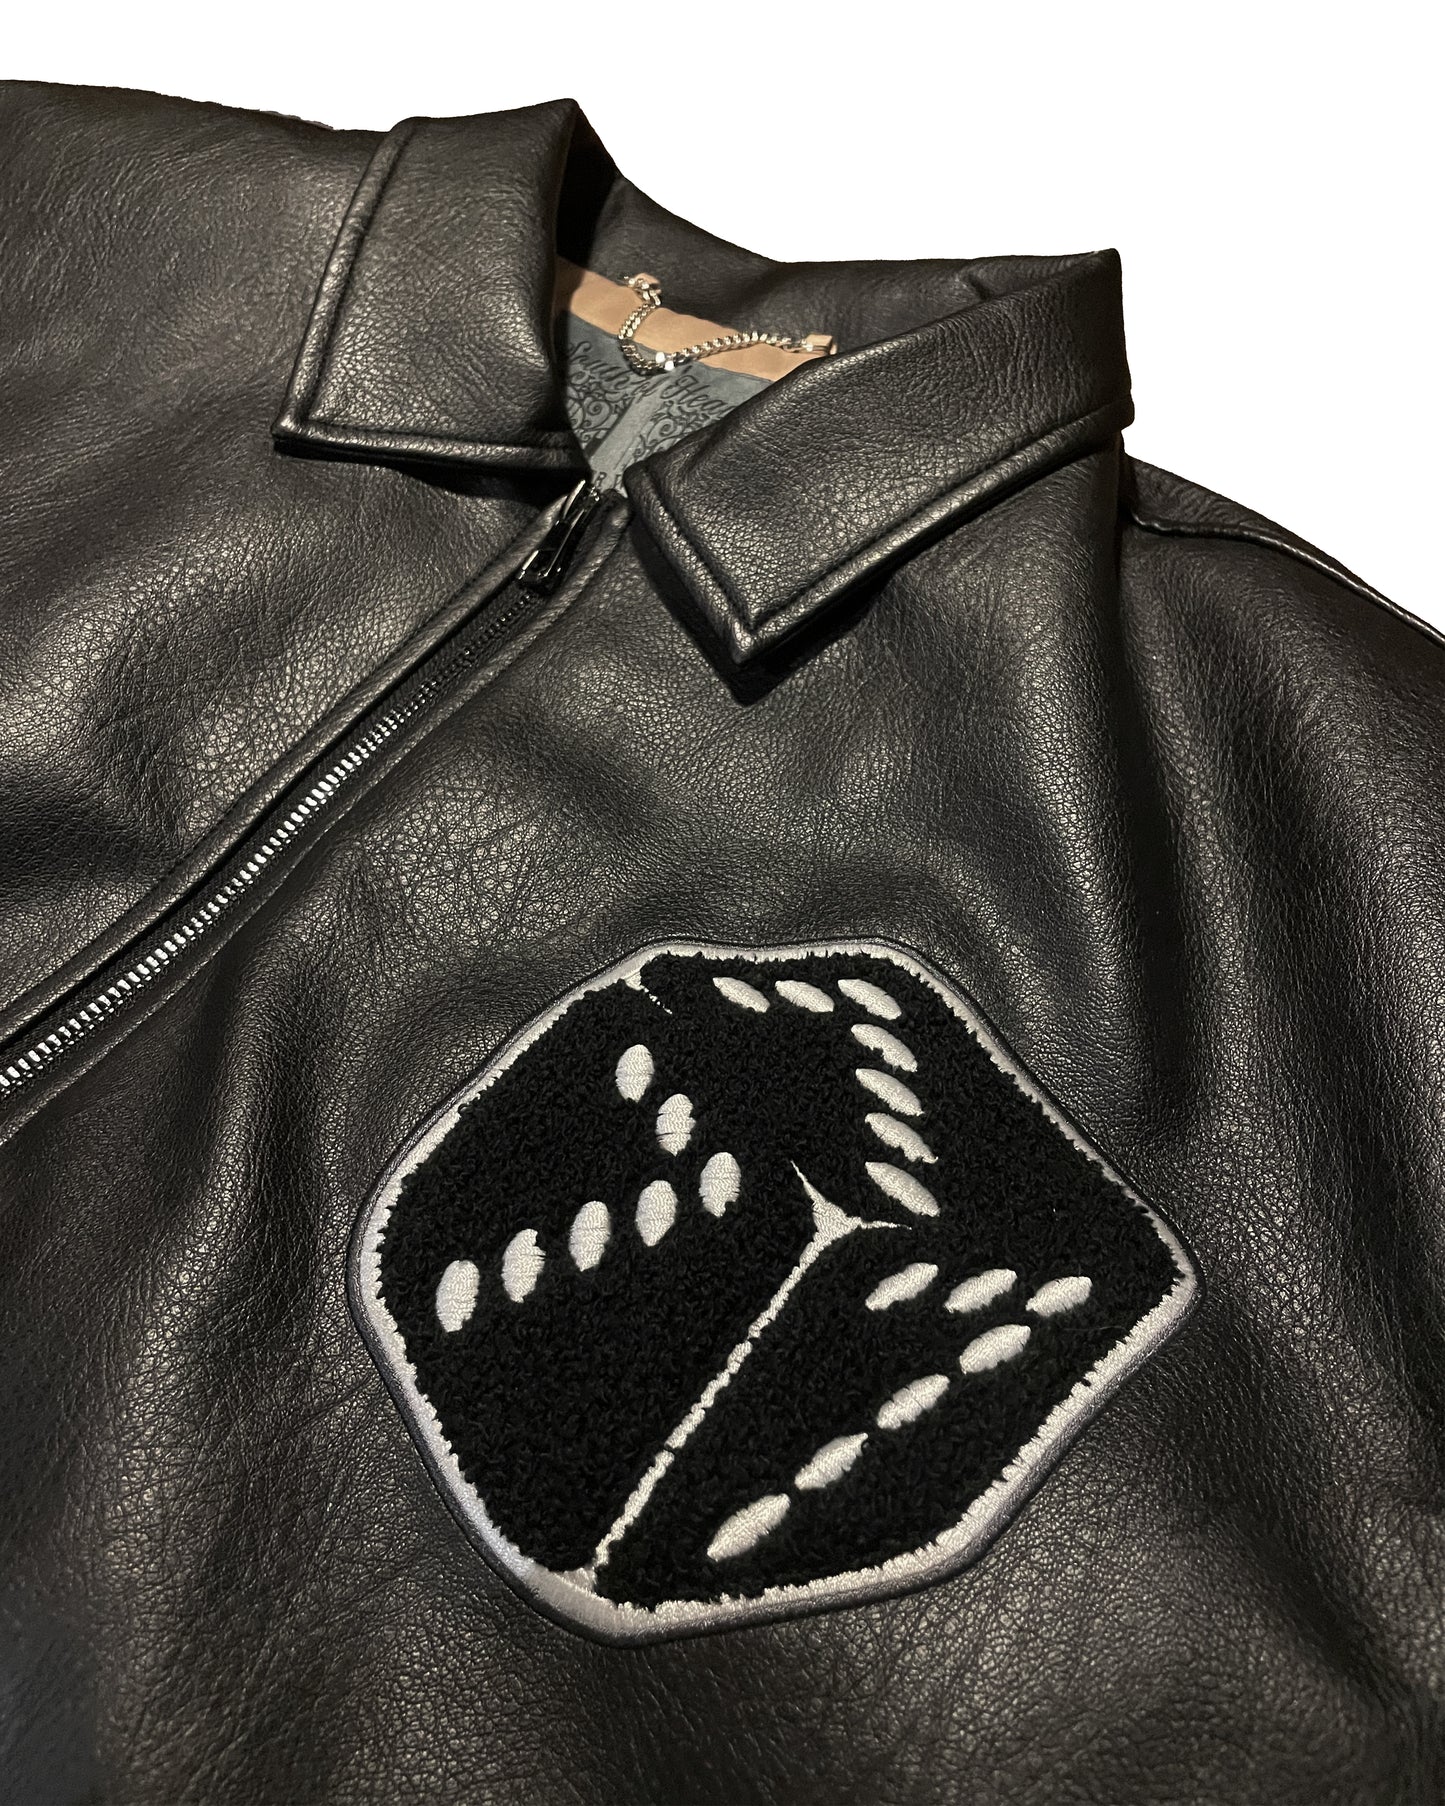 NORTH OF HELL - Vegan Leather Jacket